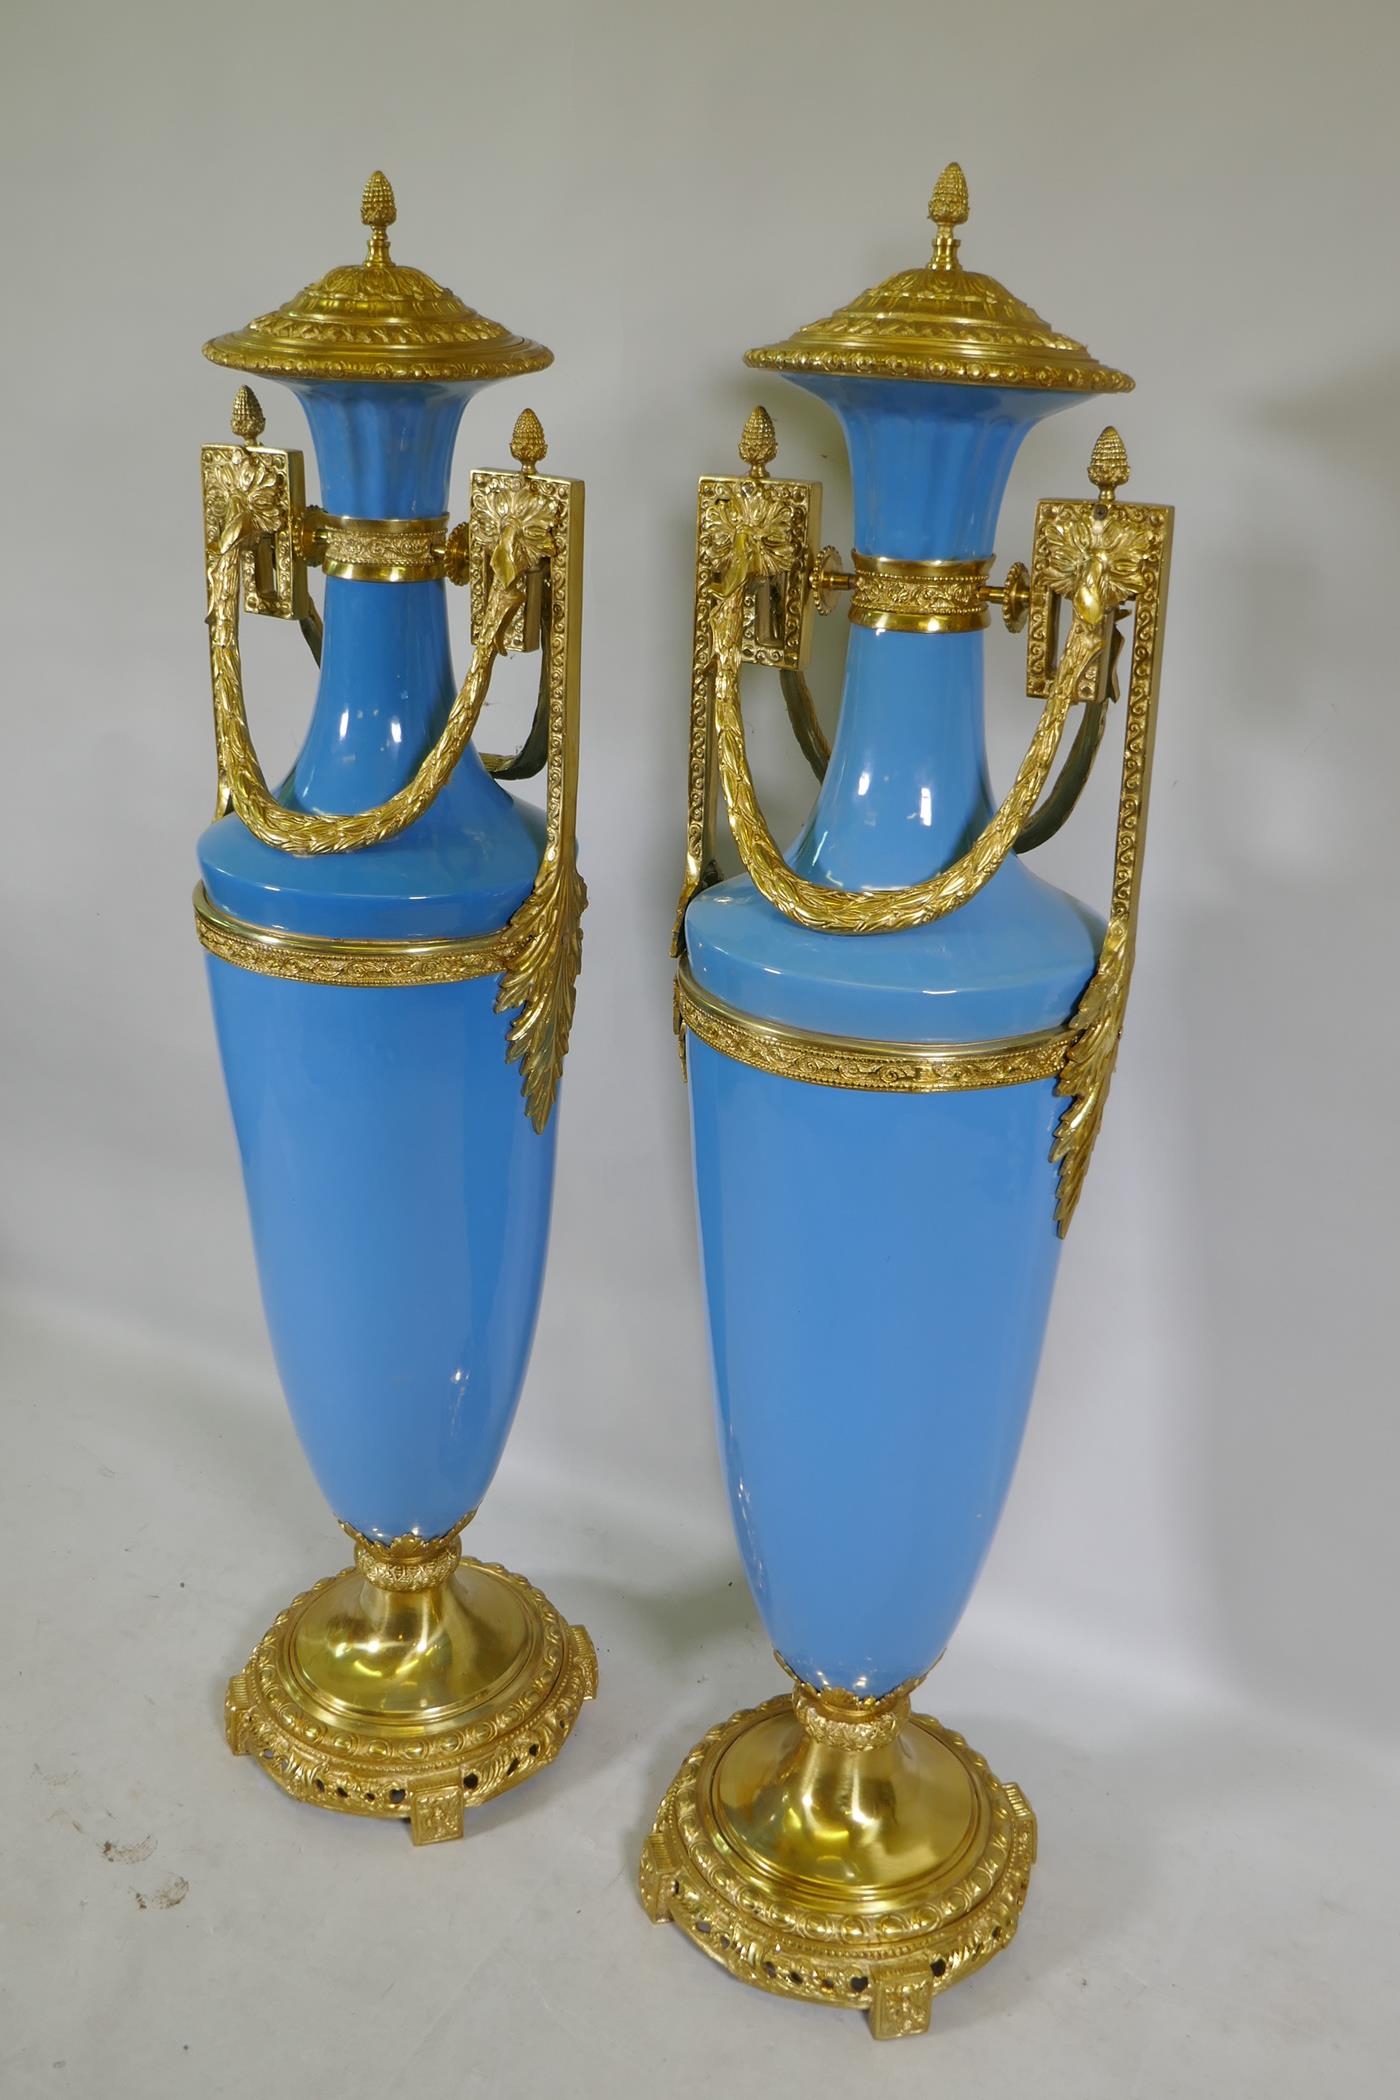 A large pair of Sevres blue style ceramic urns with ormolu mounts, 135cm high - Image 2 of 4